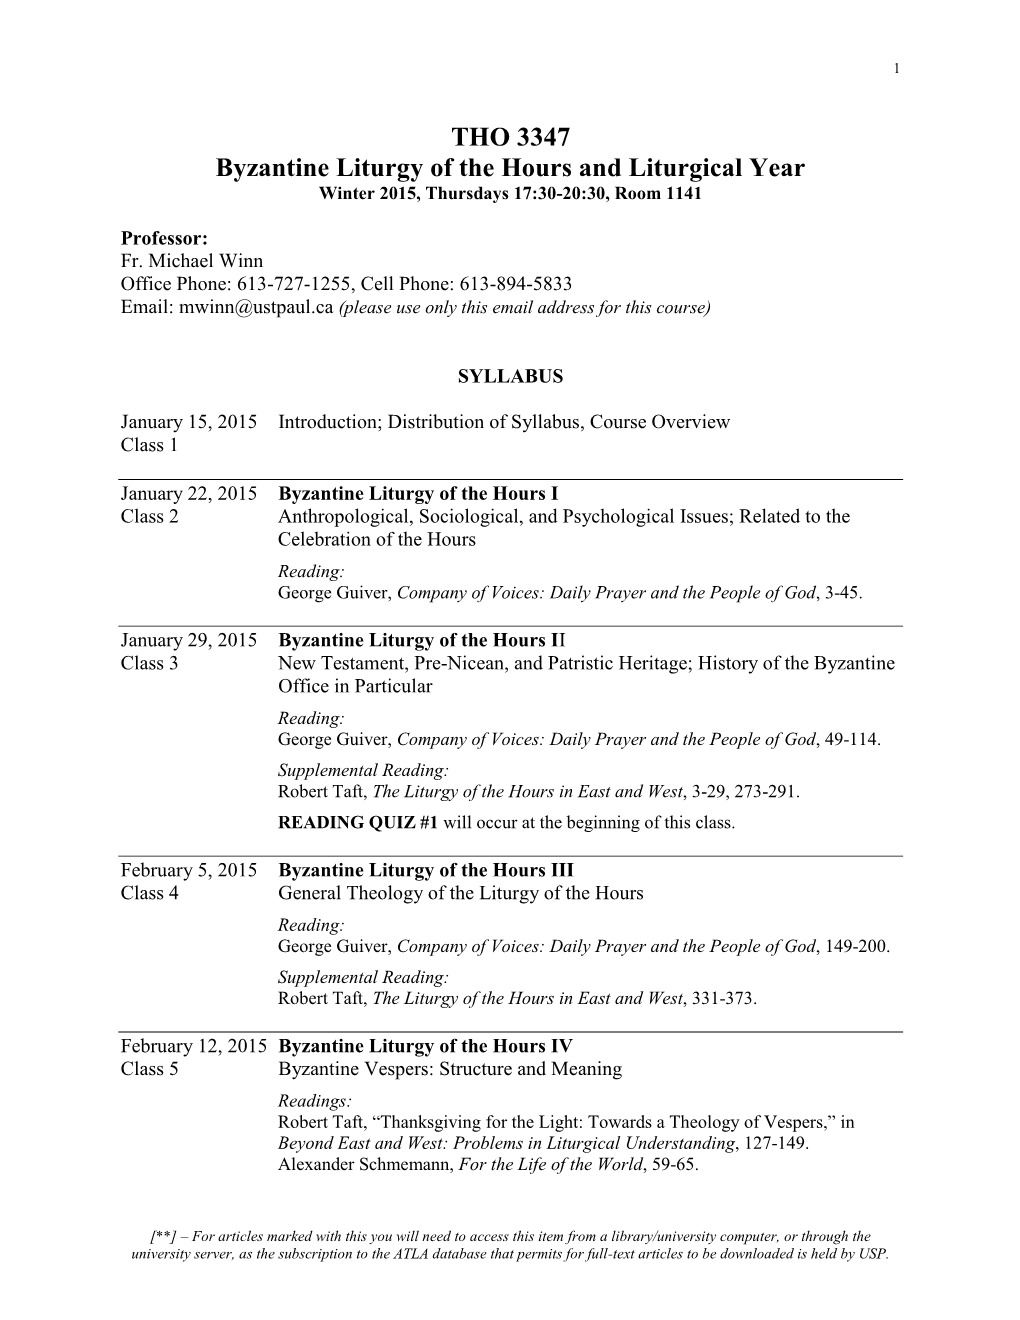 THO 3347 Byzantine Liturgy of the Hours and Liturgical Year Winter 2015, Thursdays 17:30-20:30, Room 1141